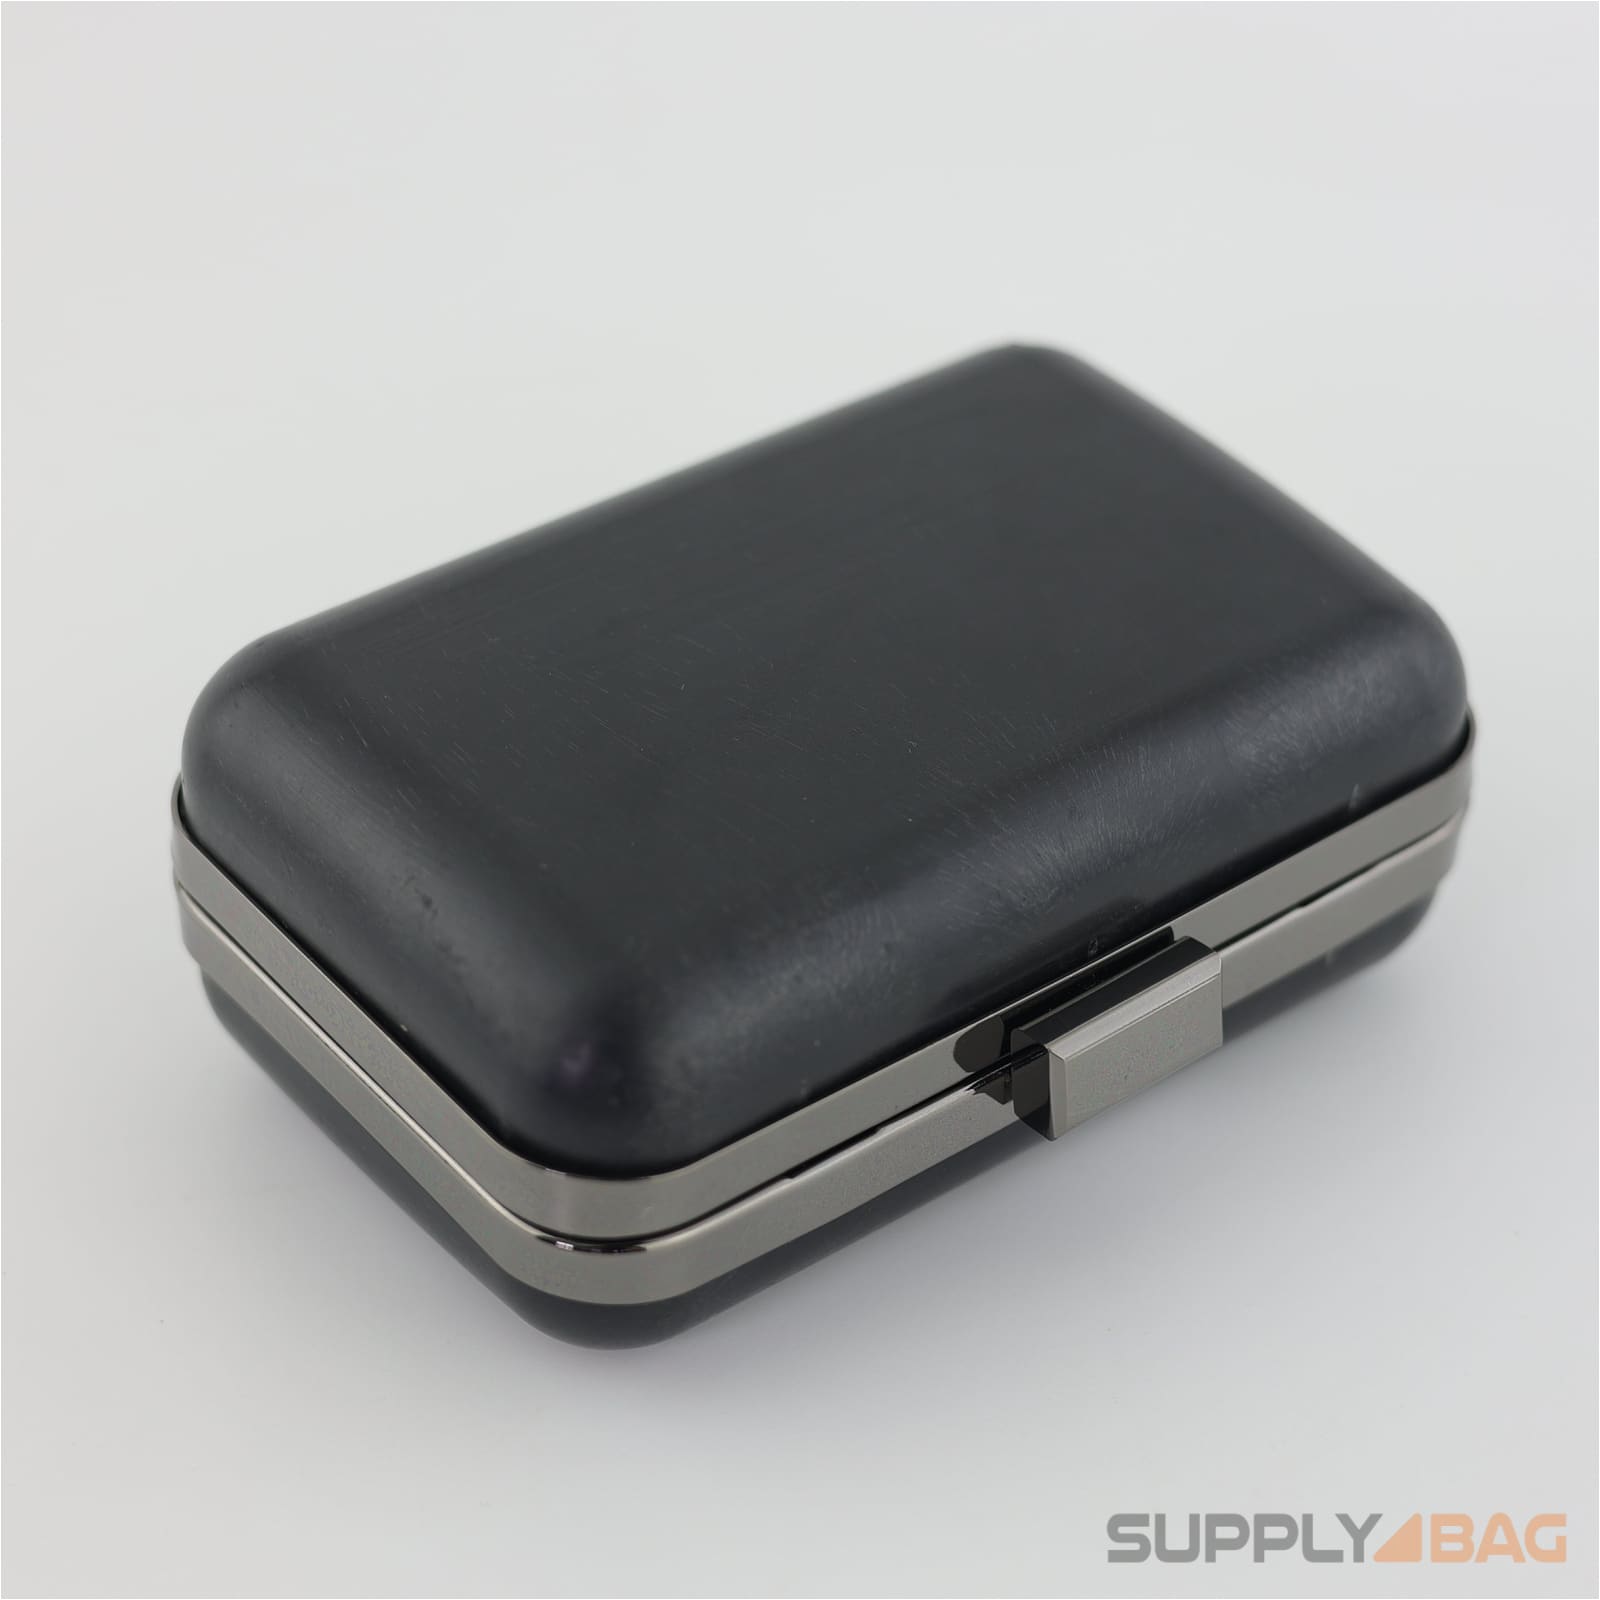 5 3/8 x 3 1/2 inch - gunmetal clamshell clutch frame with covers